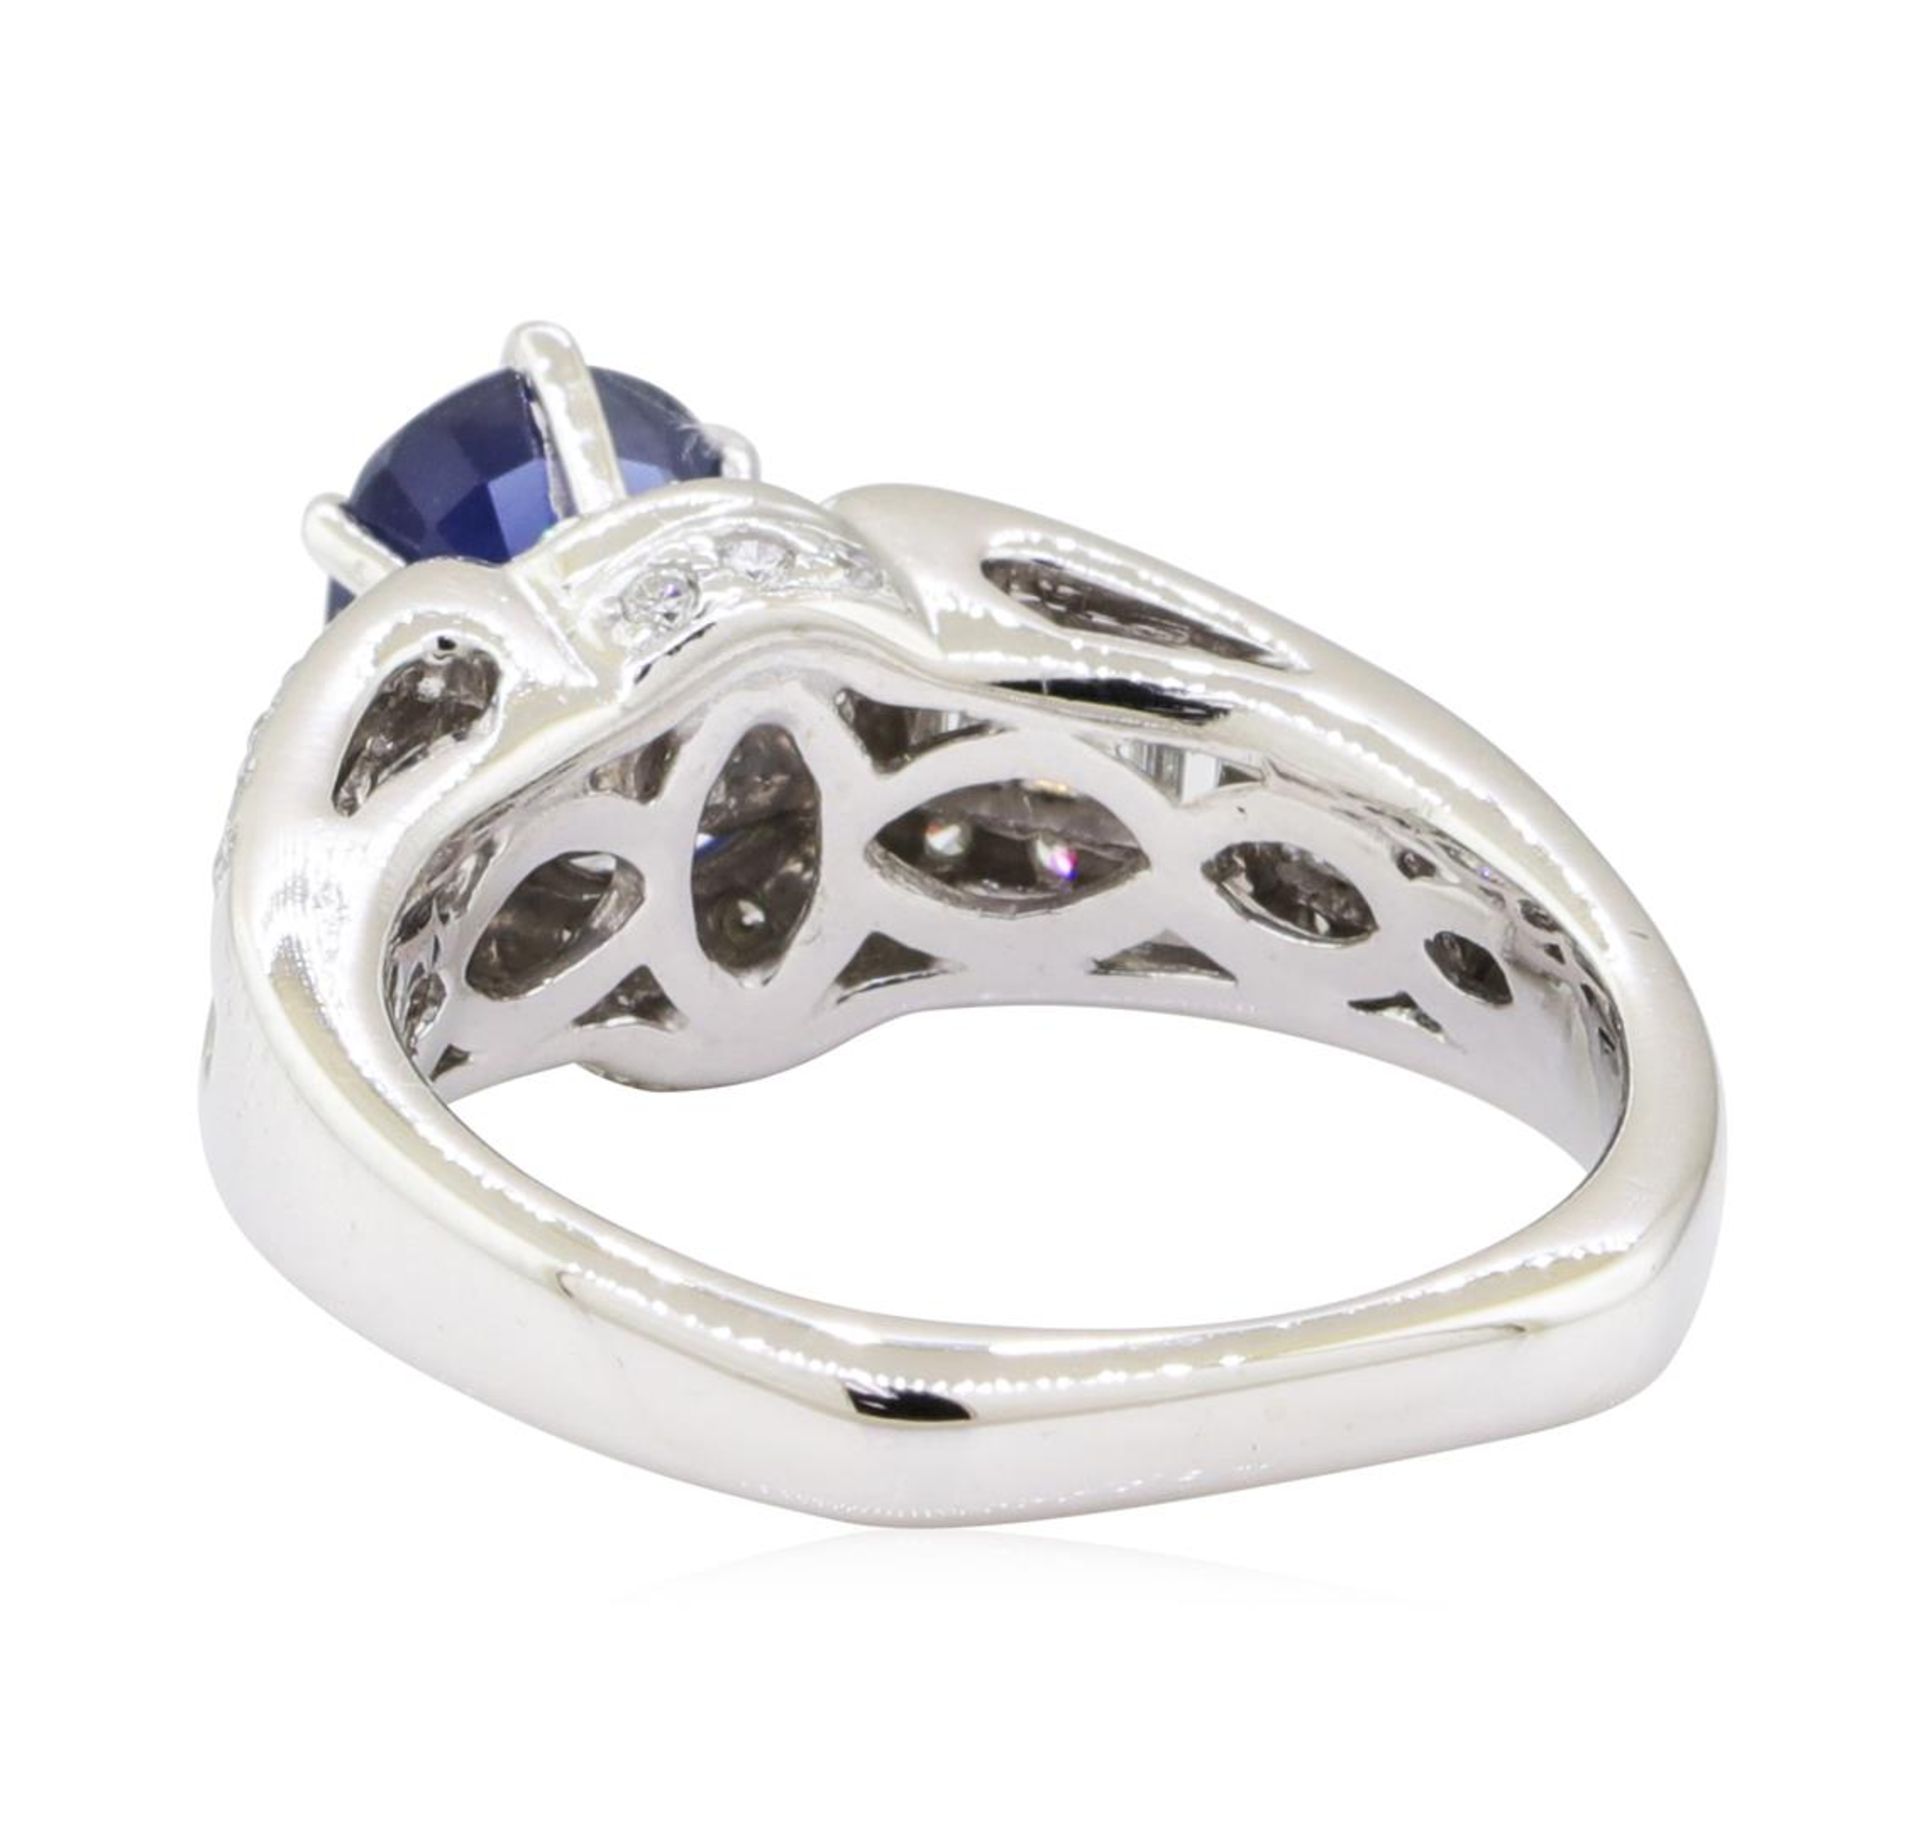 2.01 ctw Sapphire and Diamond Ring - 14KT White Gold - Image 5 of 10